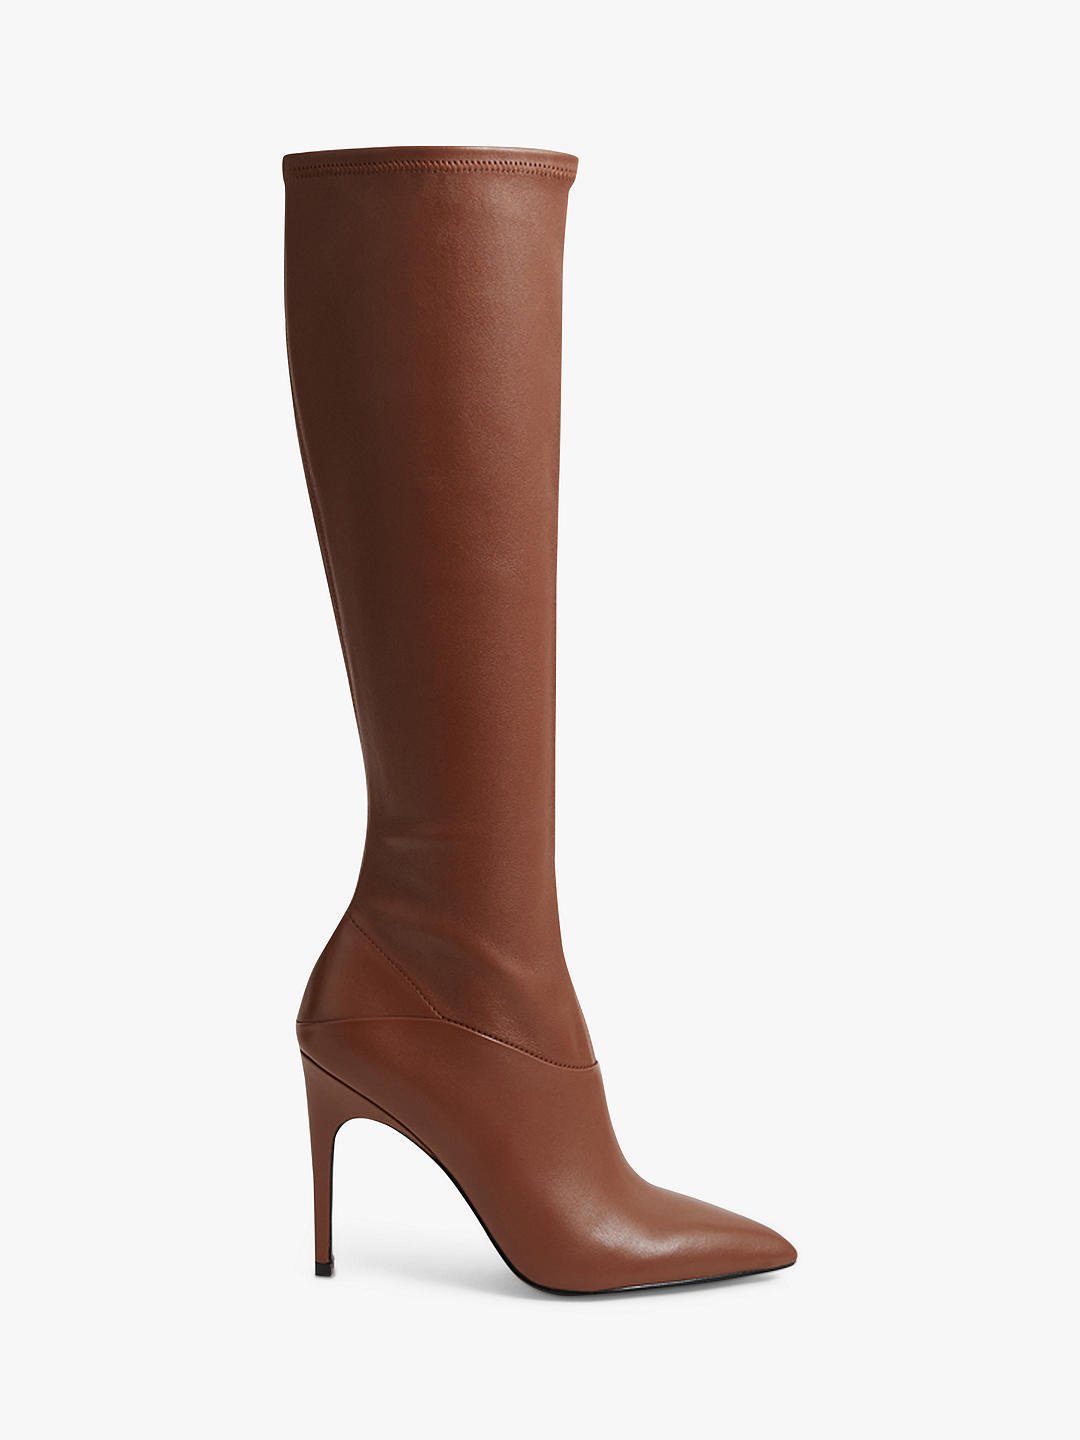 Reiss Carina Knee High Boots in Tan Leather — UFO No More